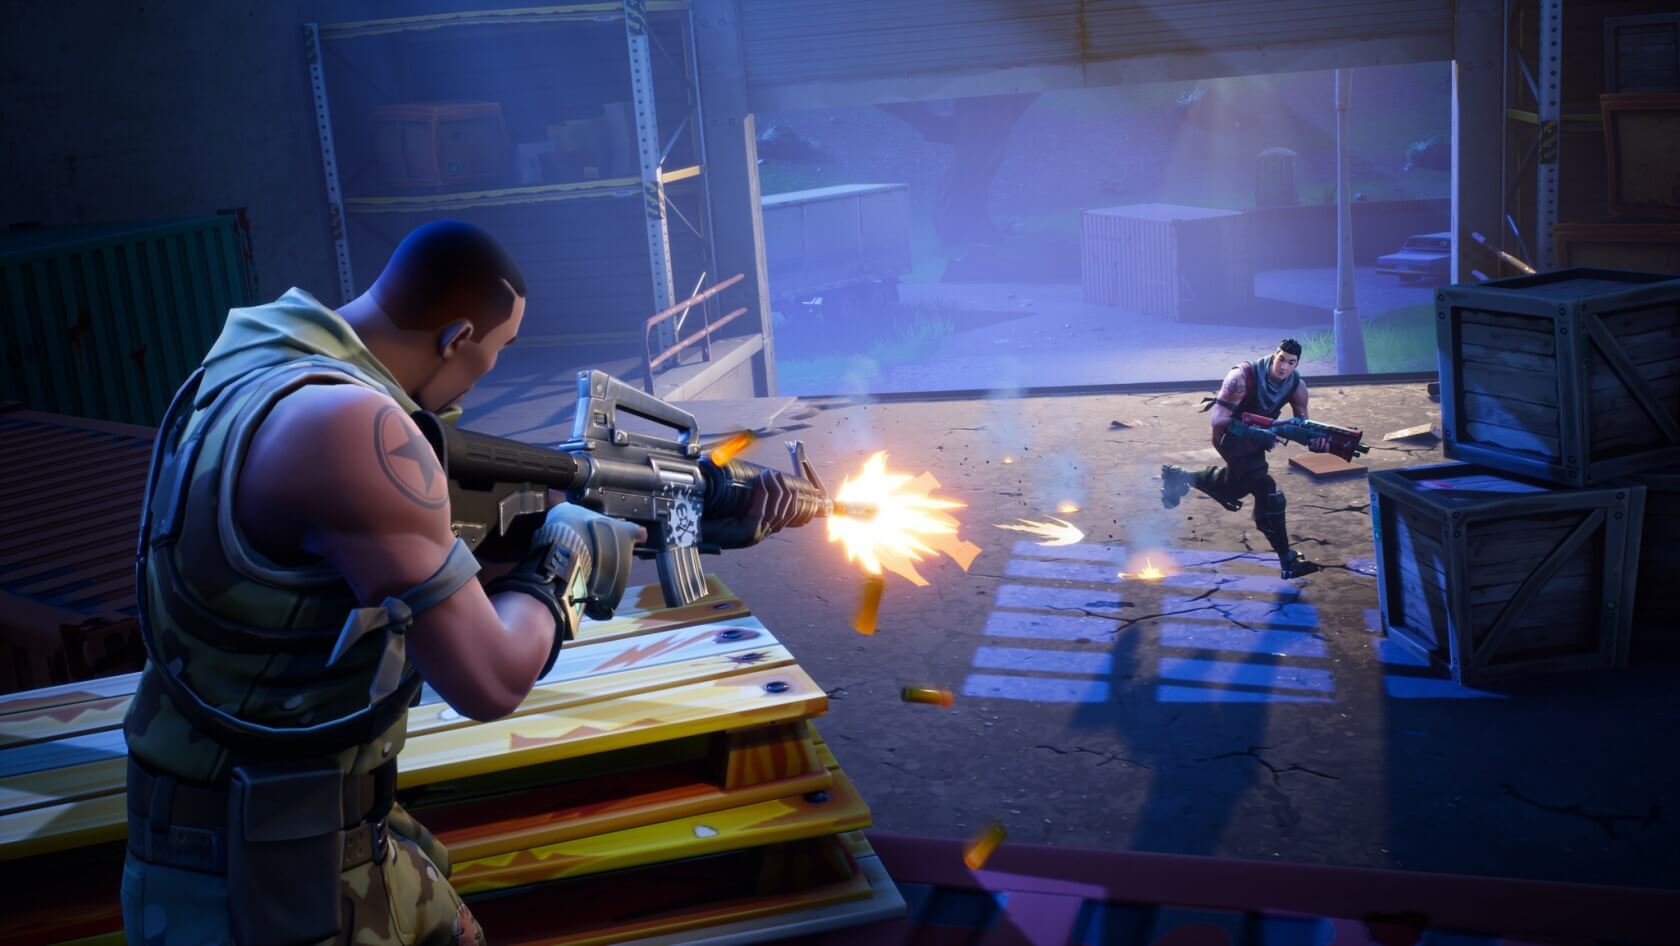 Apple's iPhone XS, XS Max, and XR can now run Fortnite at 60 FPS